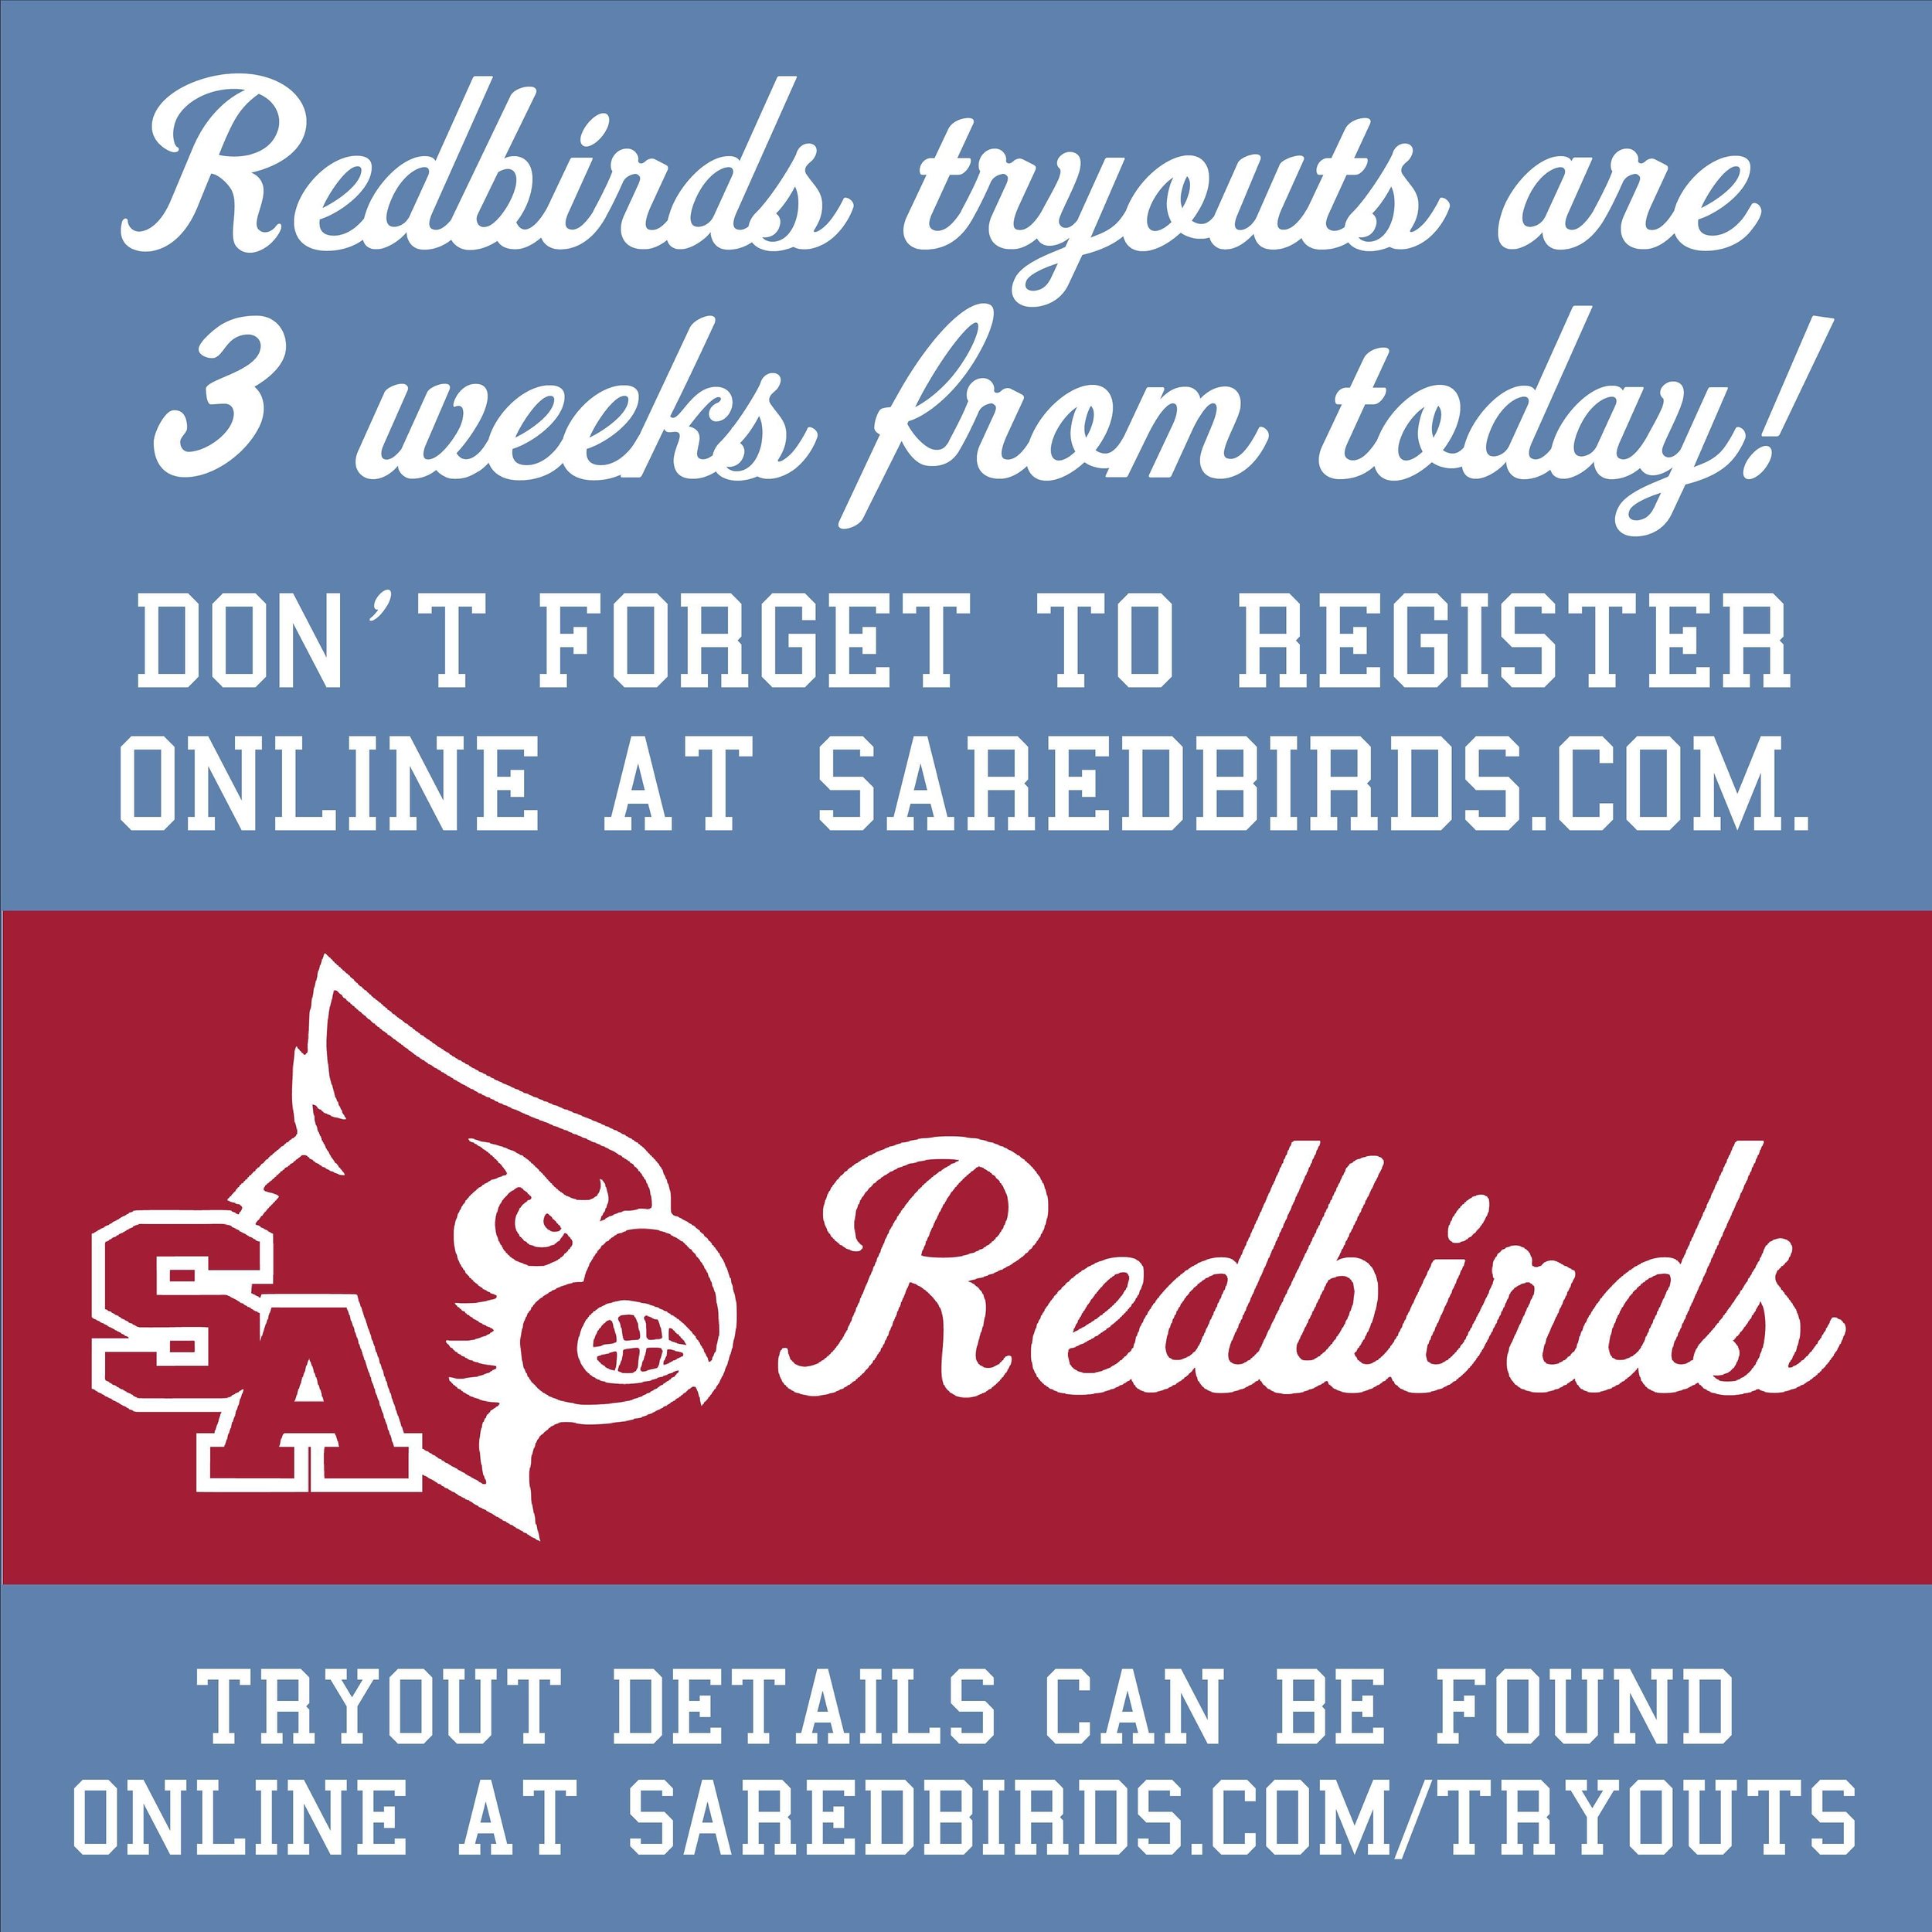 Don&rsquo;t forget to register online at www.saredbirds.com. We look forward to seeing you in 3 weeks! Go Redbirds! ⚾️